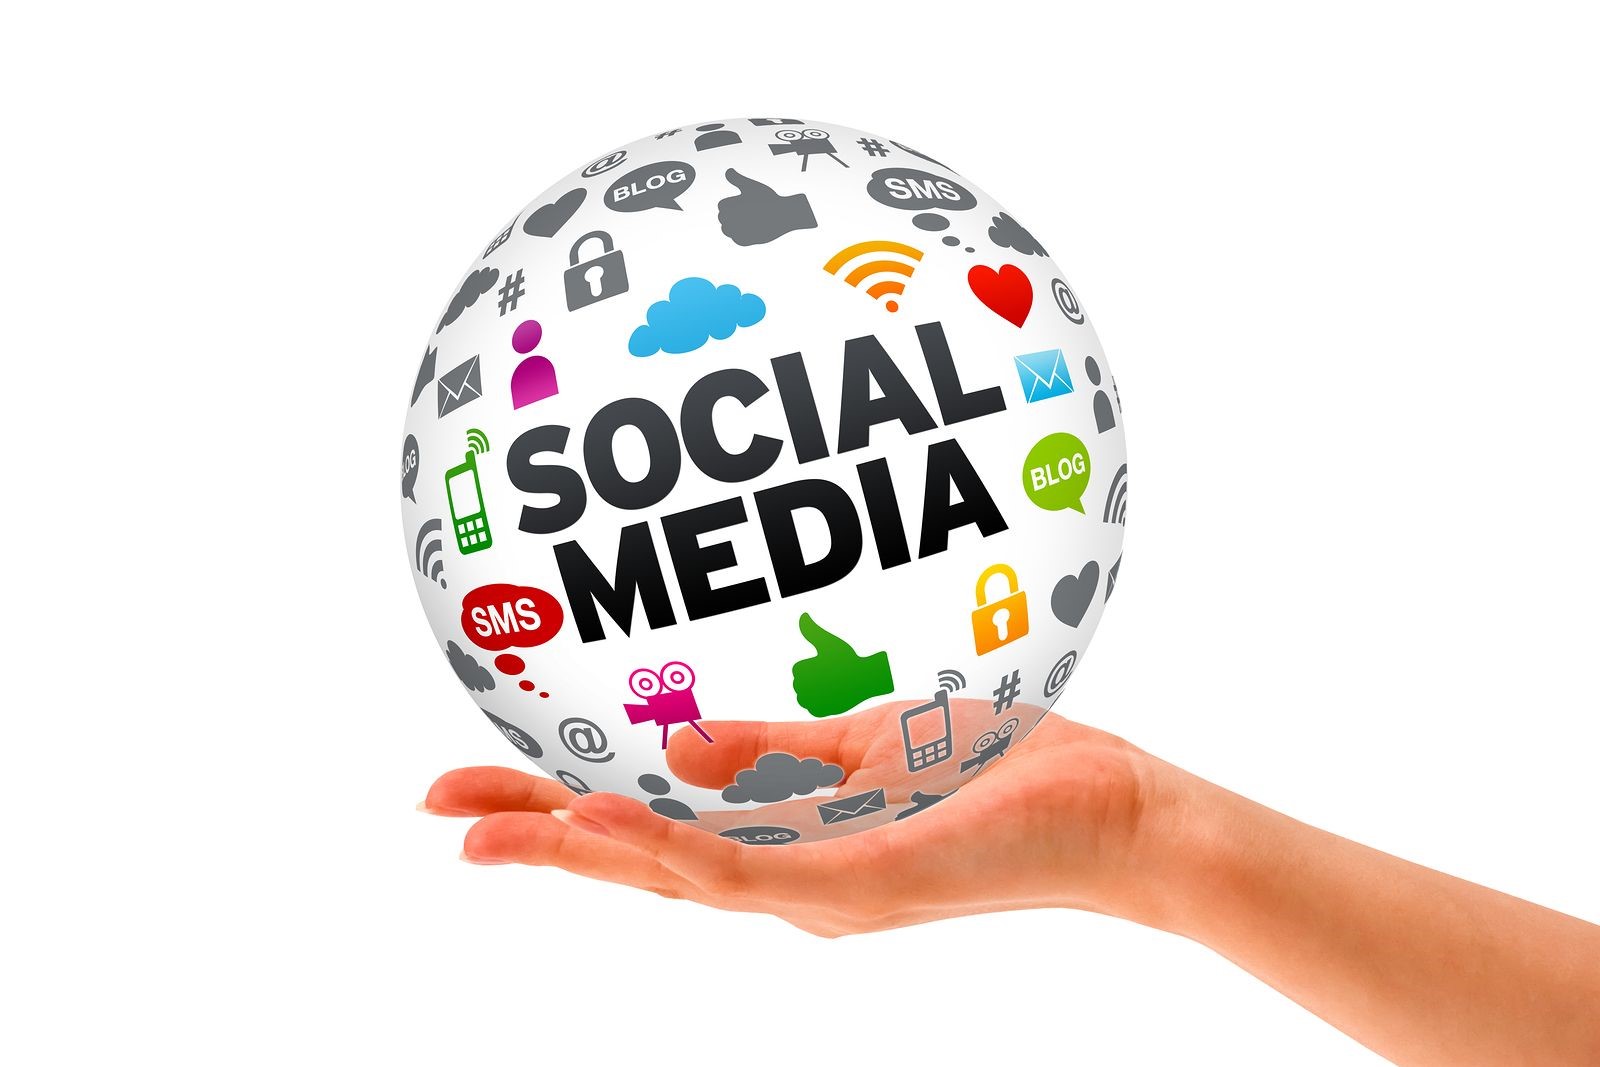 Digital Marketing Agency Gives Tips for Your Social Media Approach